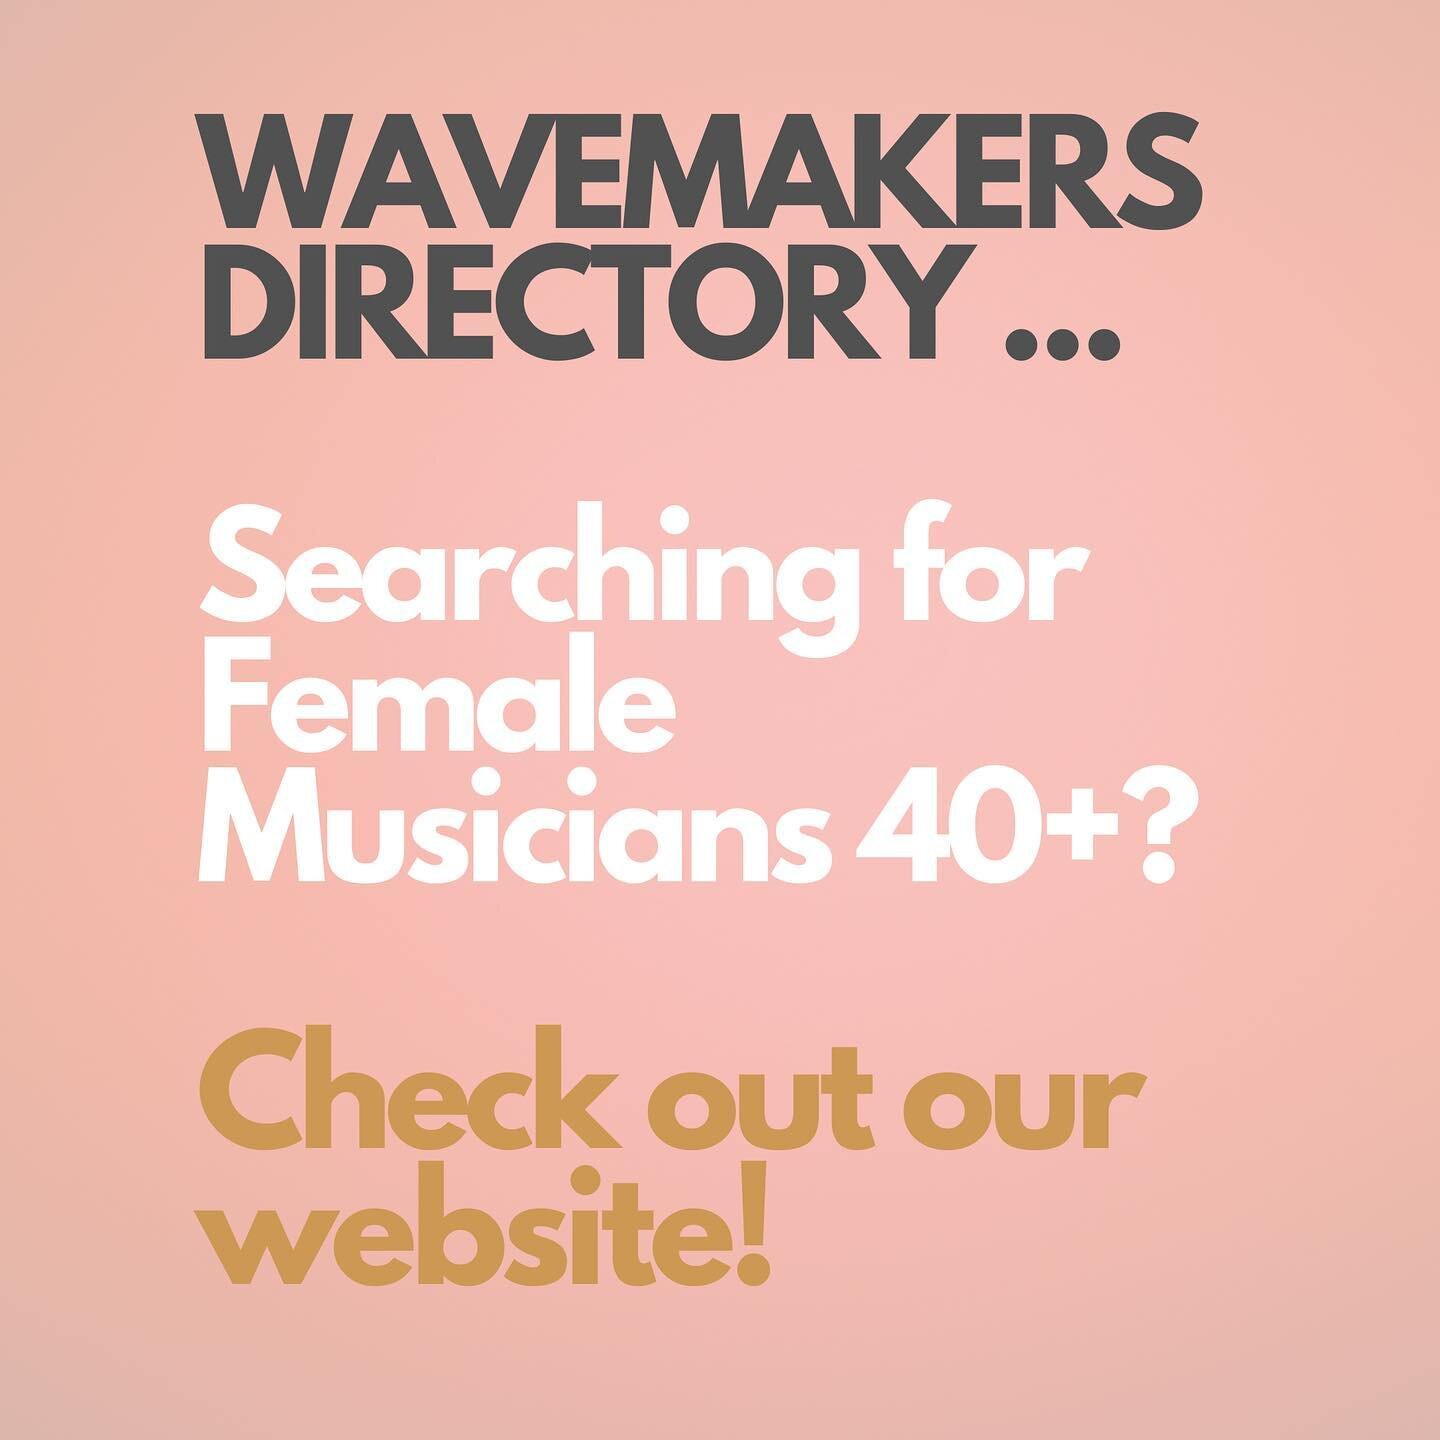 We&rsquo;ve got THE LIST!
Looking for a Female Musician 40+ ? Look no further than the Wavemakers website! The only online directory that features our community of Women in Music 40+. 
A valuable resource that will surprise you! 

Visit us online at 